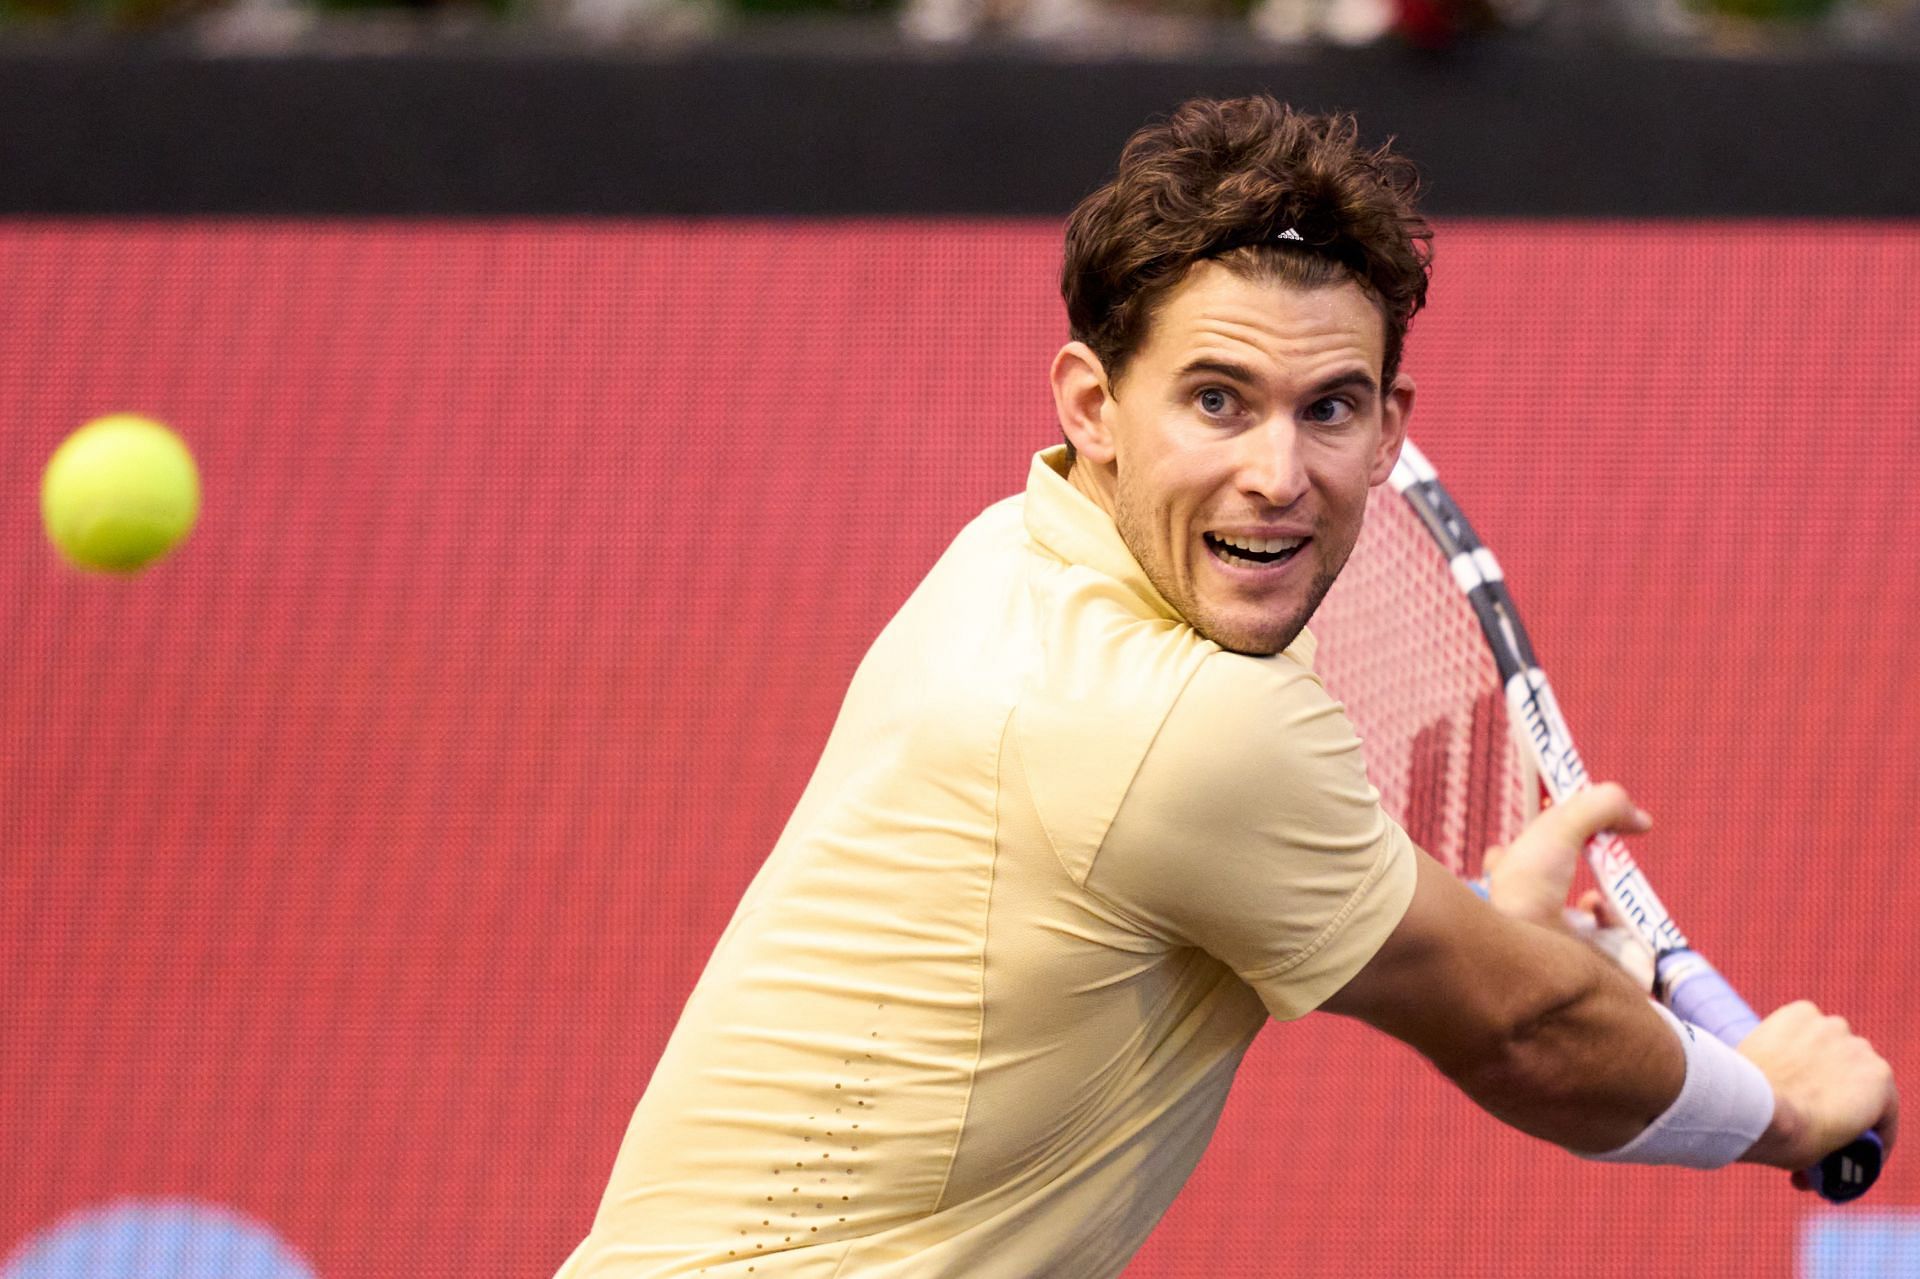 Dominic Thiem has prgoressed to three semifinals and two quarterfinals on the ATP tour in 2022